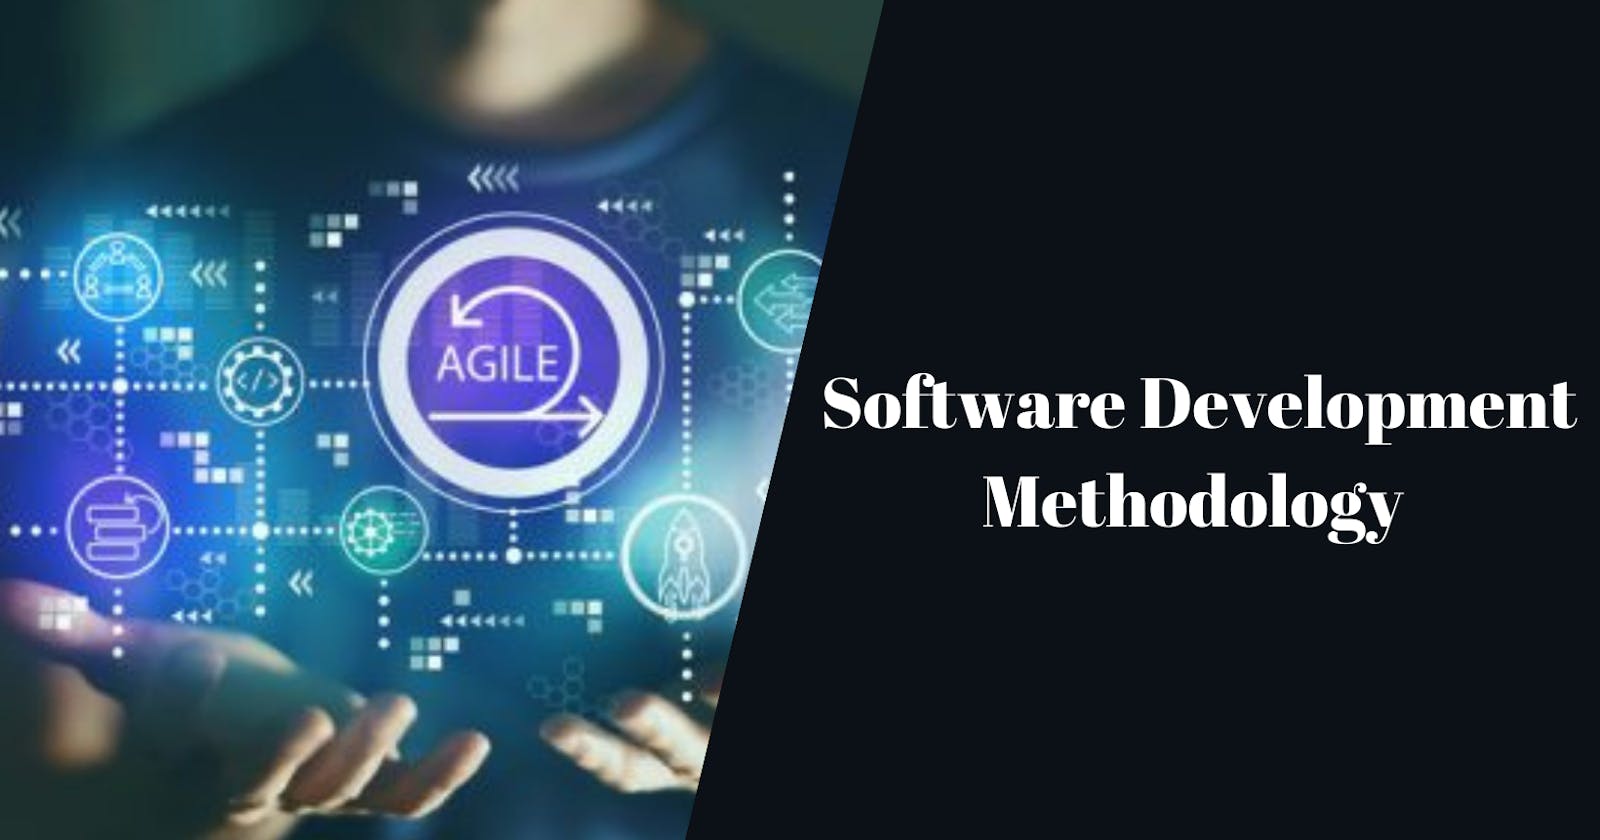 Top 4 Software Development Methodologies: Key to Choose the Right One?